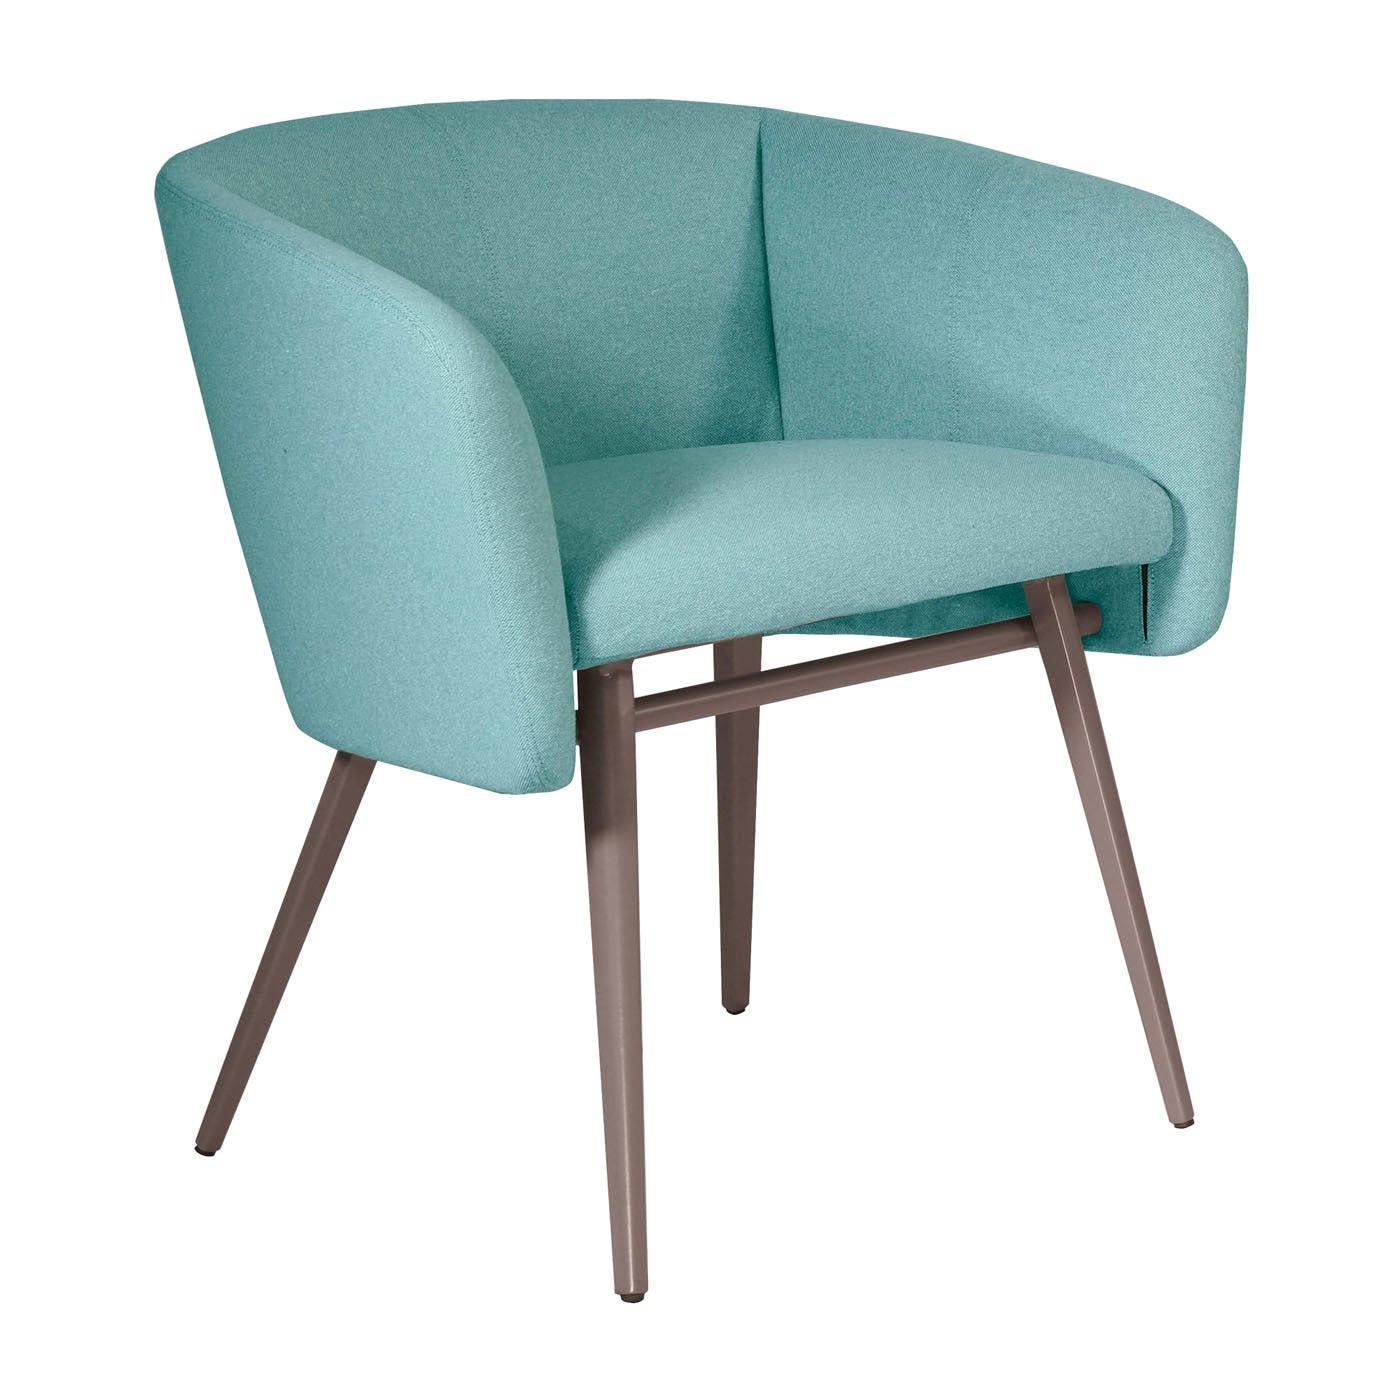 Balù Met Light Blue and Gray Chair by Emilio Nanni For Sale